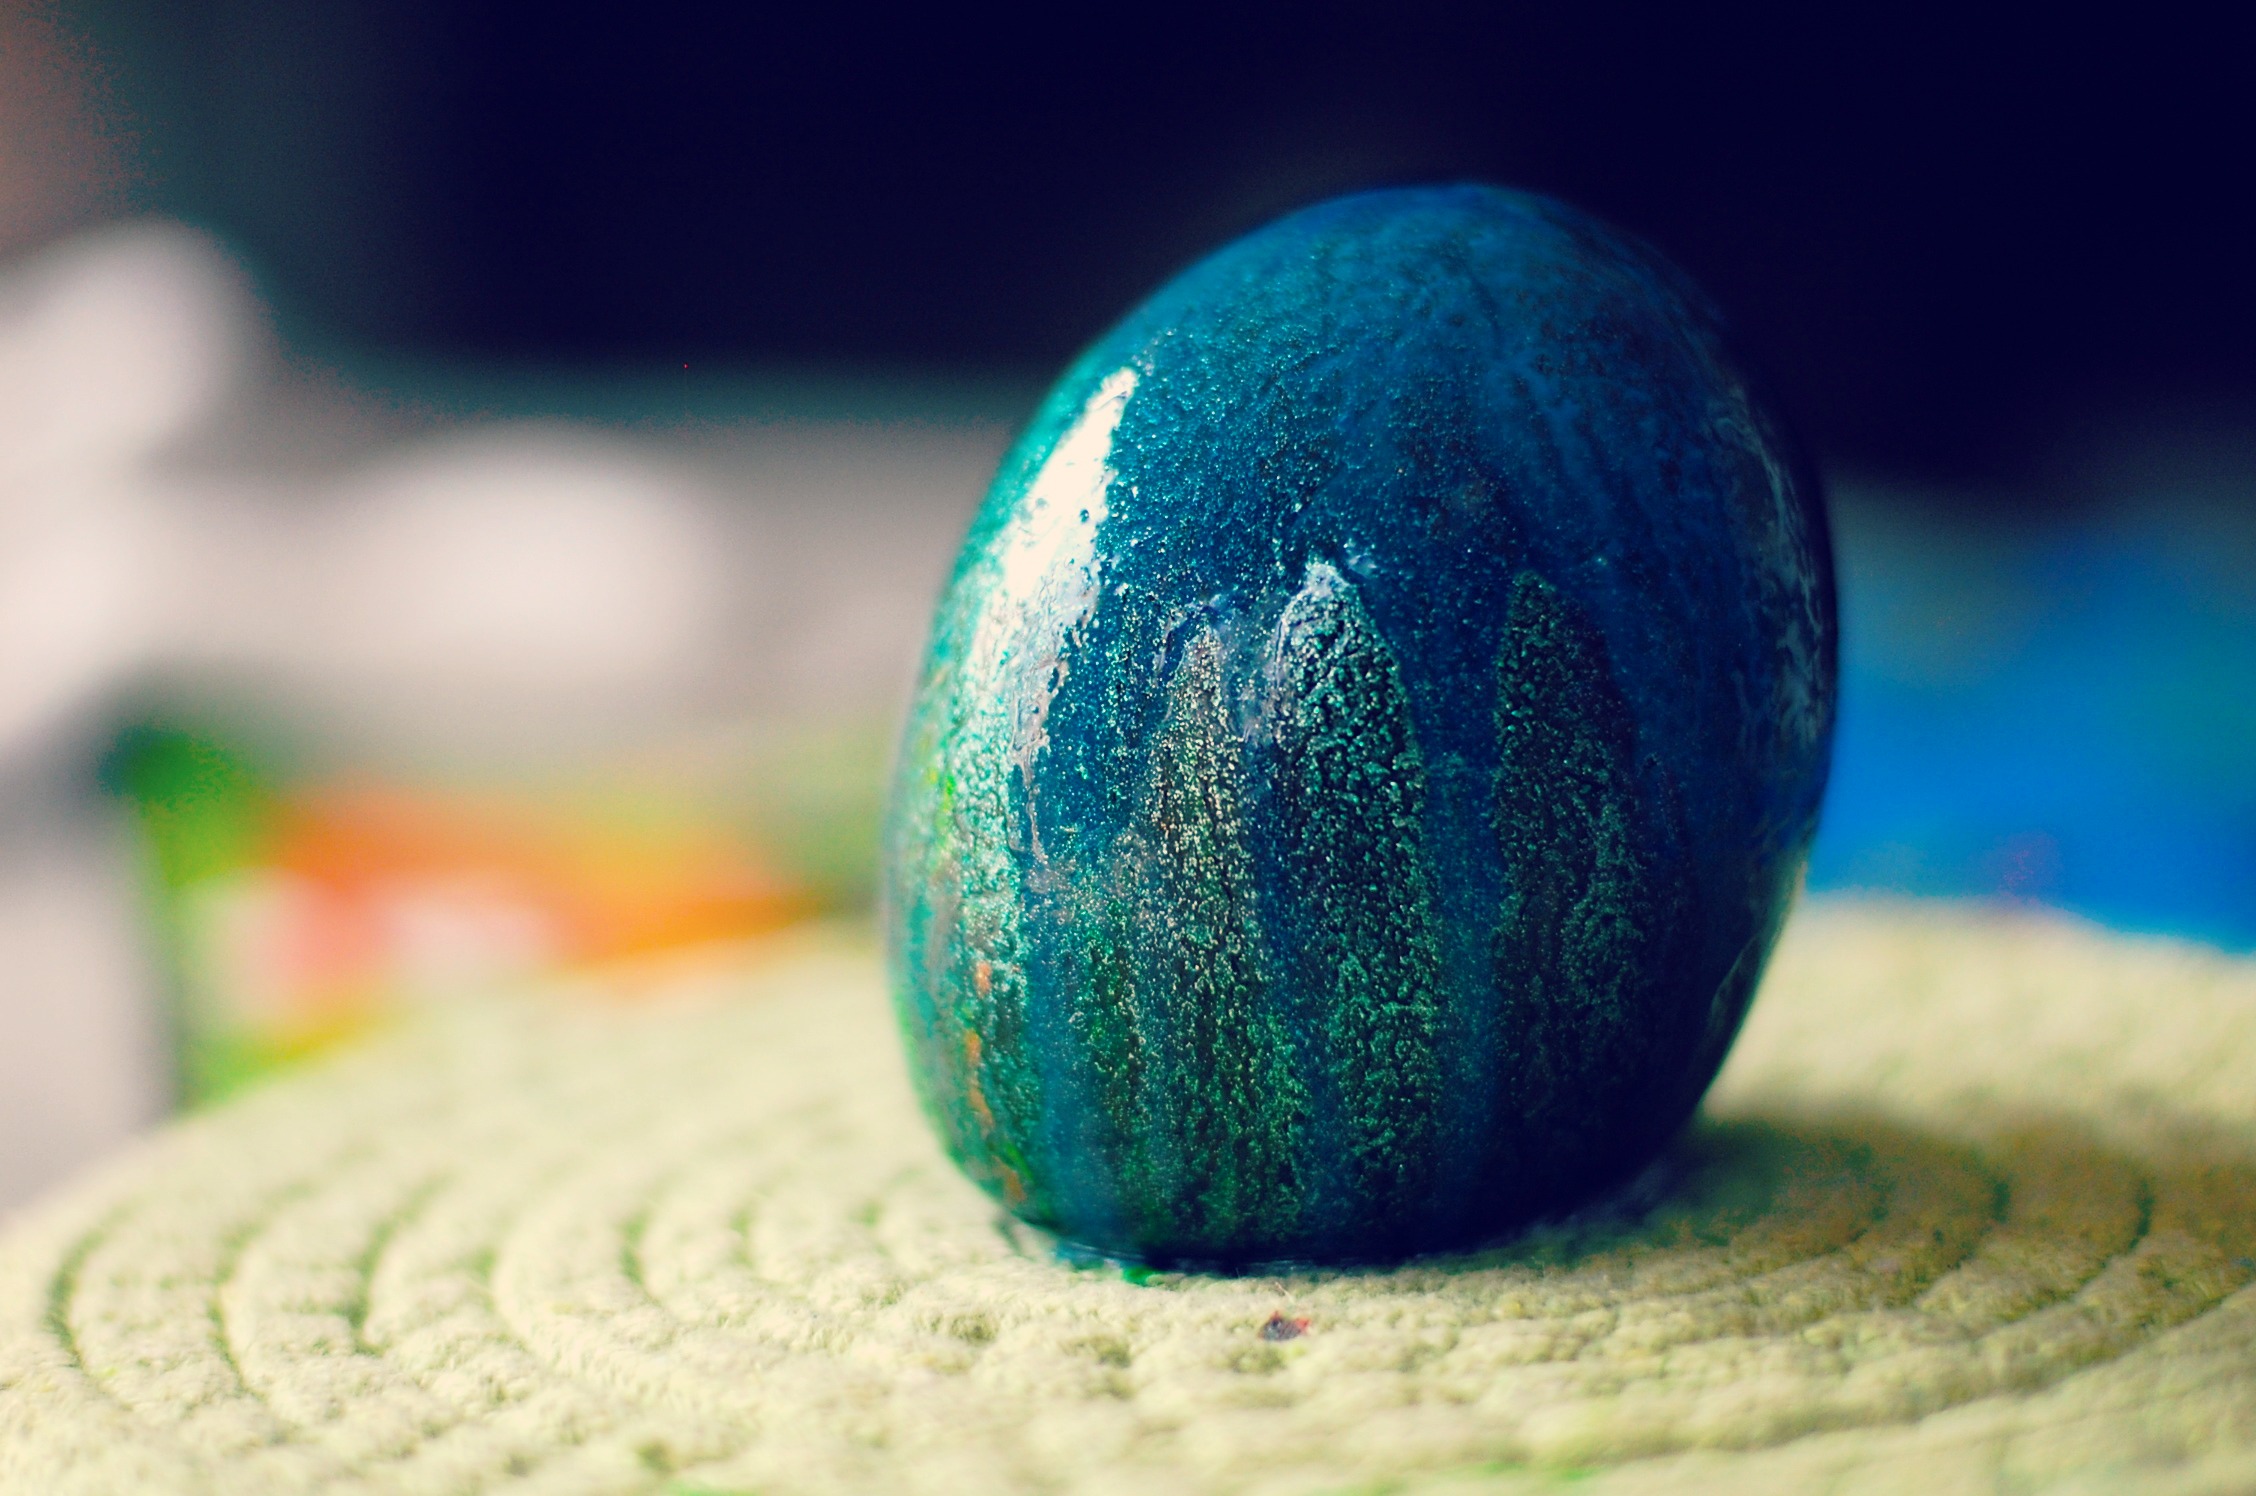 how to: paint rocks with crayons